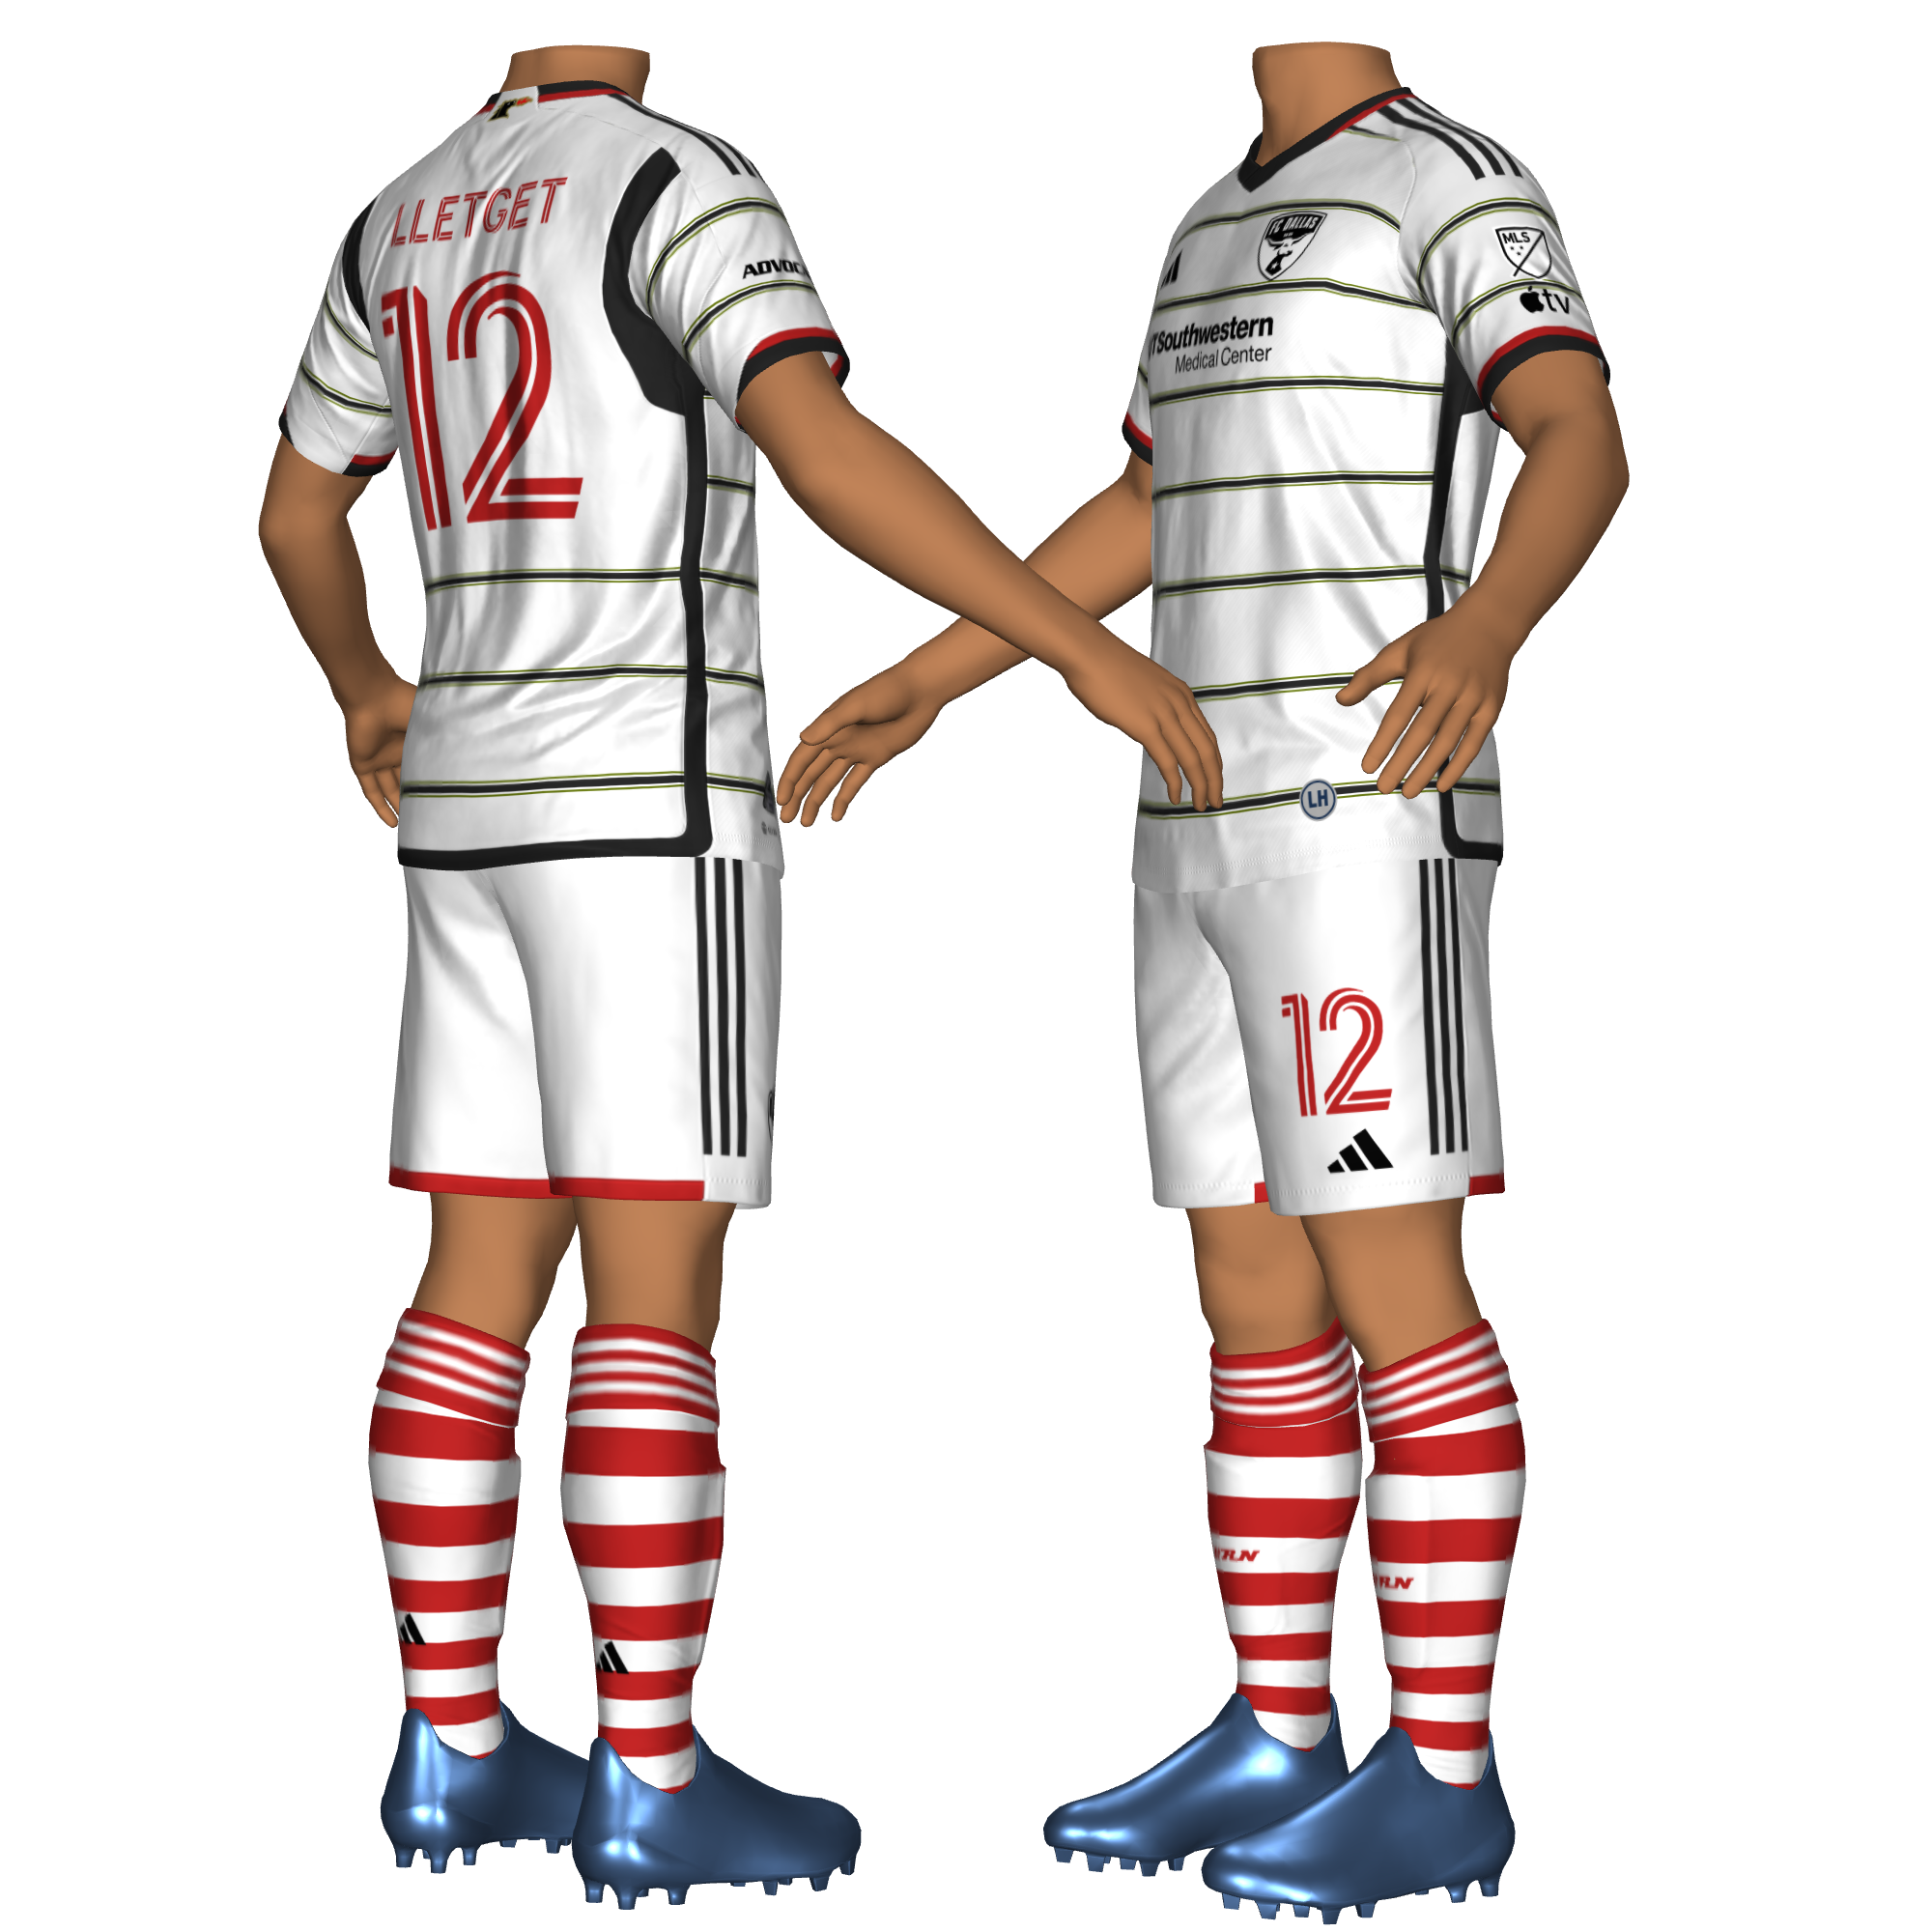 "Germany" mock-up for the 2023 FCD Kit by Dan Crooke.